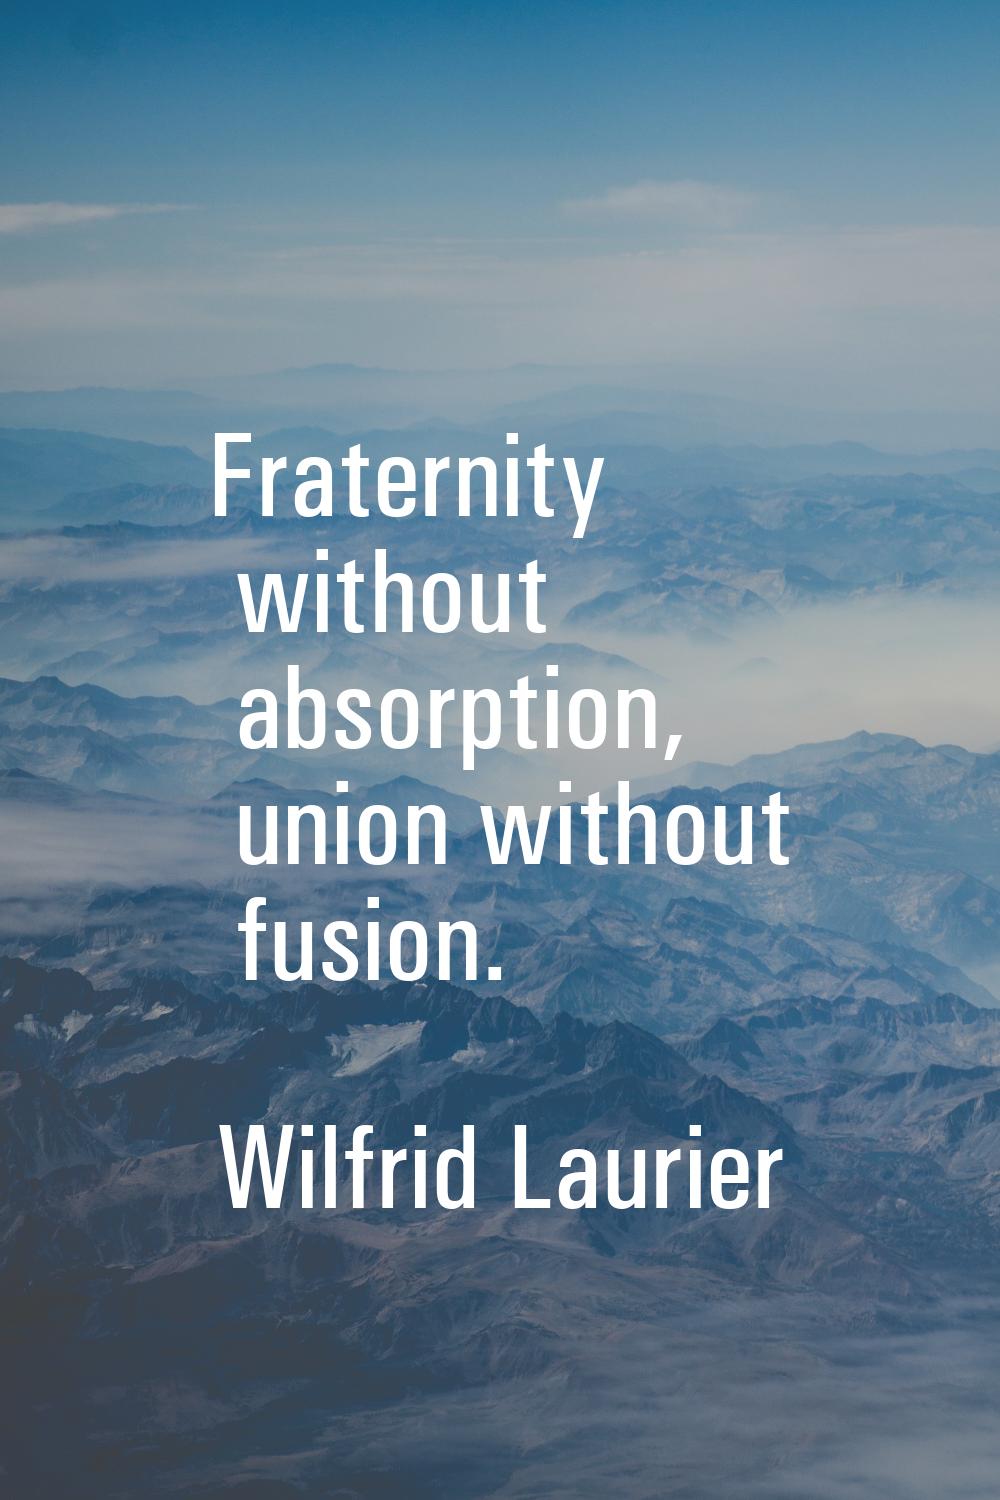 Fraternity without absorption, union without fusion.